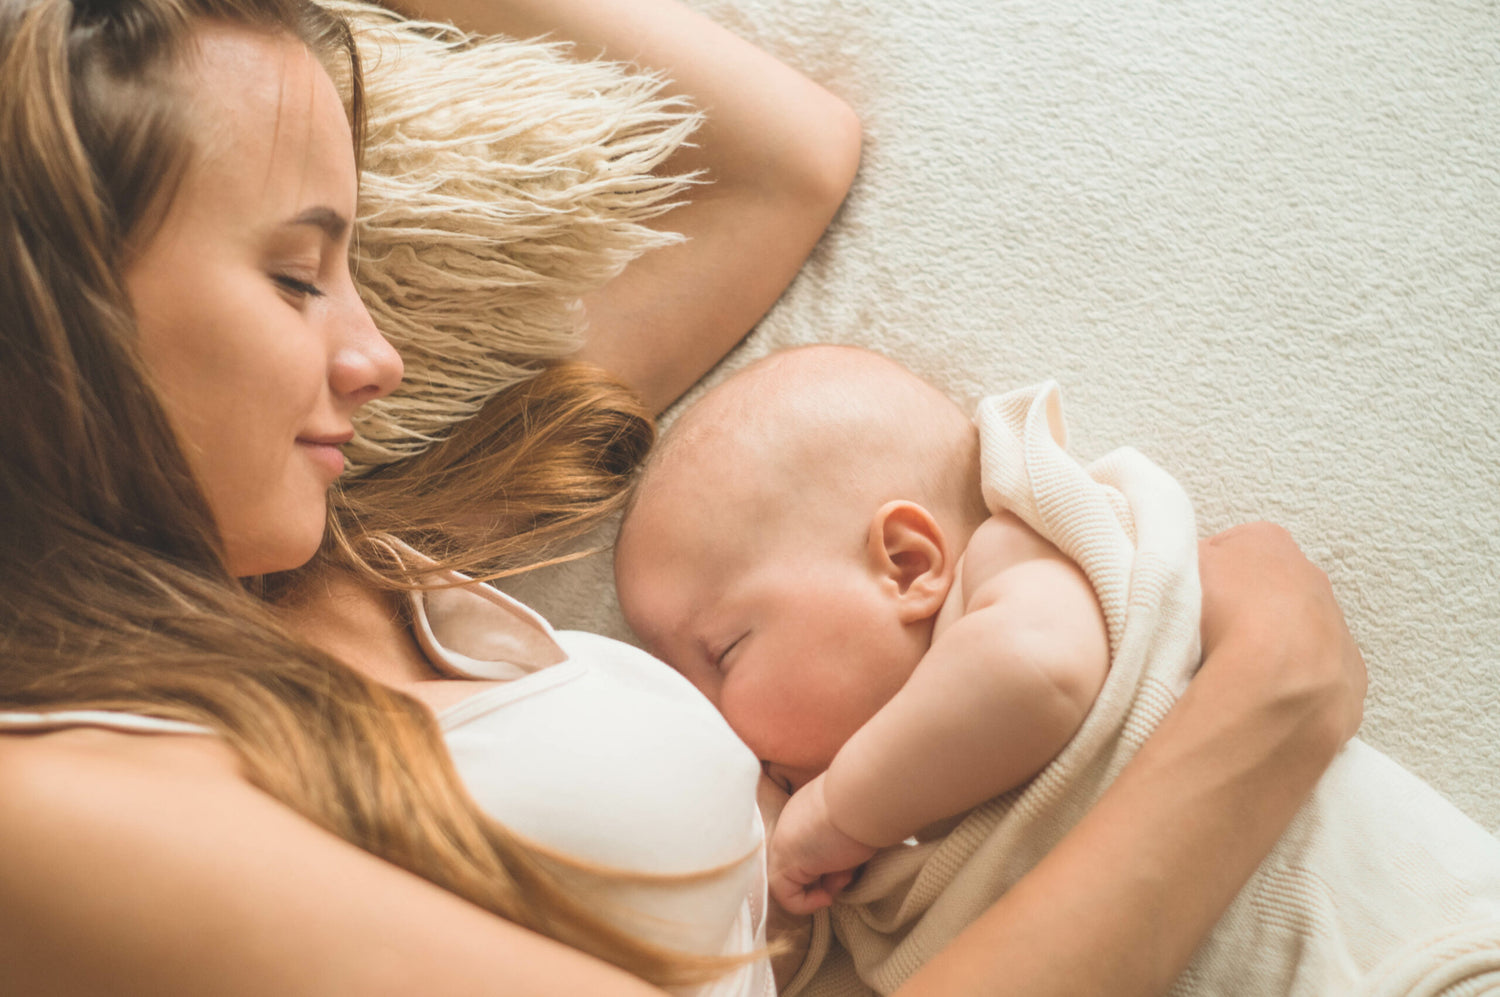 How to Find the Right Nursing Bra for A Breastfeeding Mum